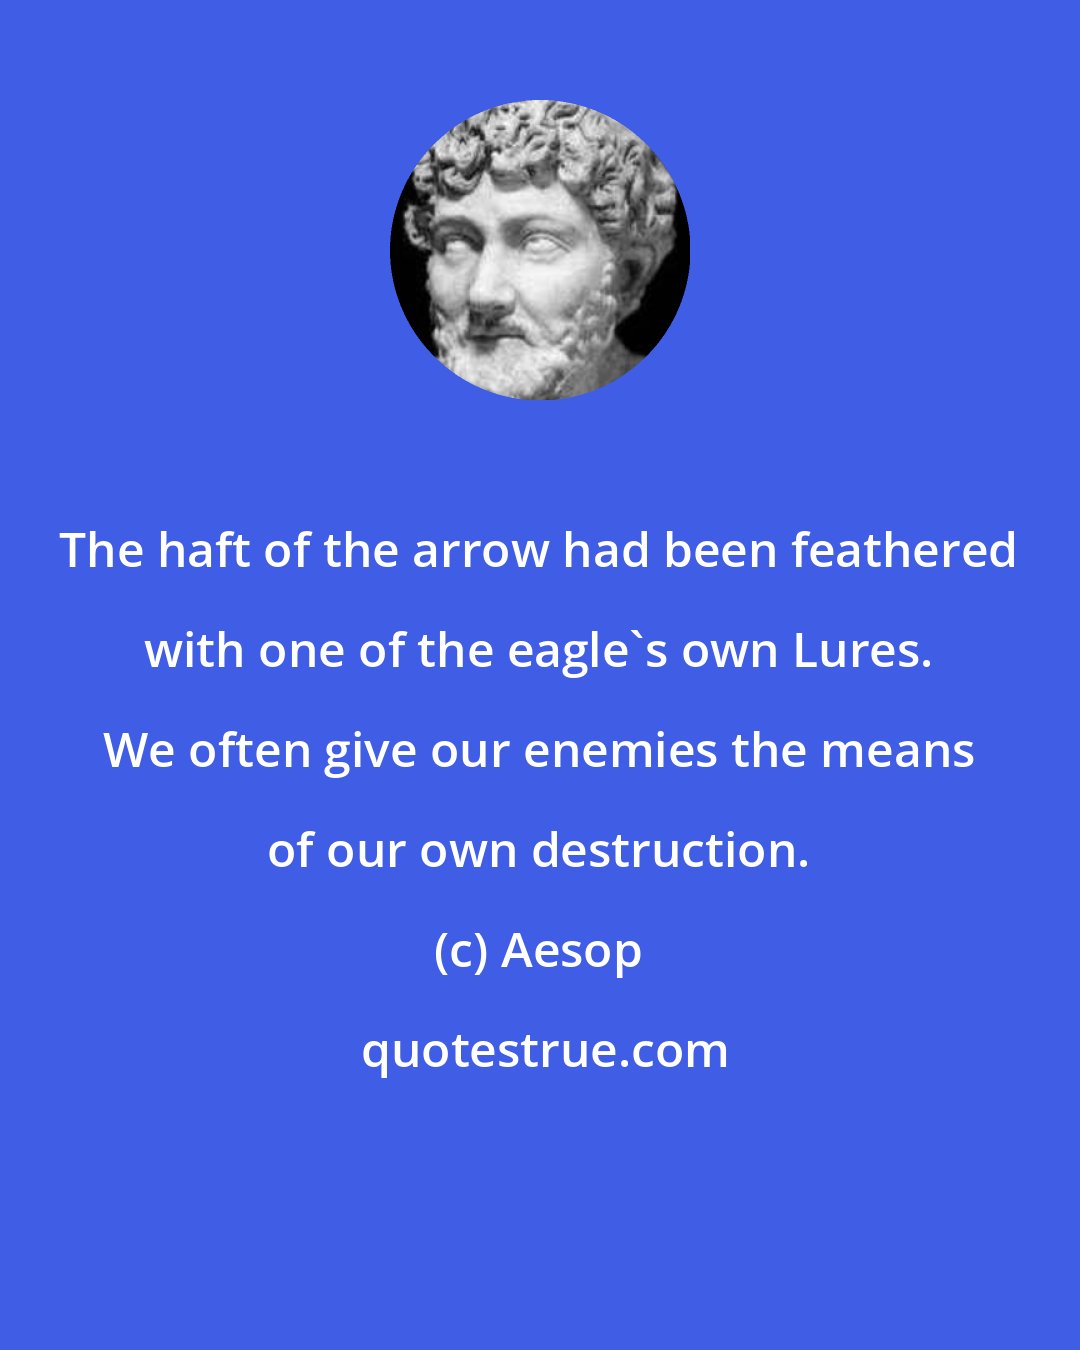 Aesop: The haft of the arrow had been feathered with one of the eagle's own Lures. We often give our enemies the means of our own destruction.